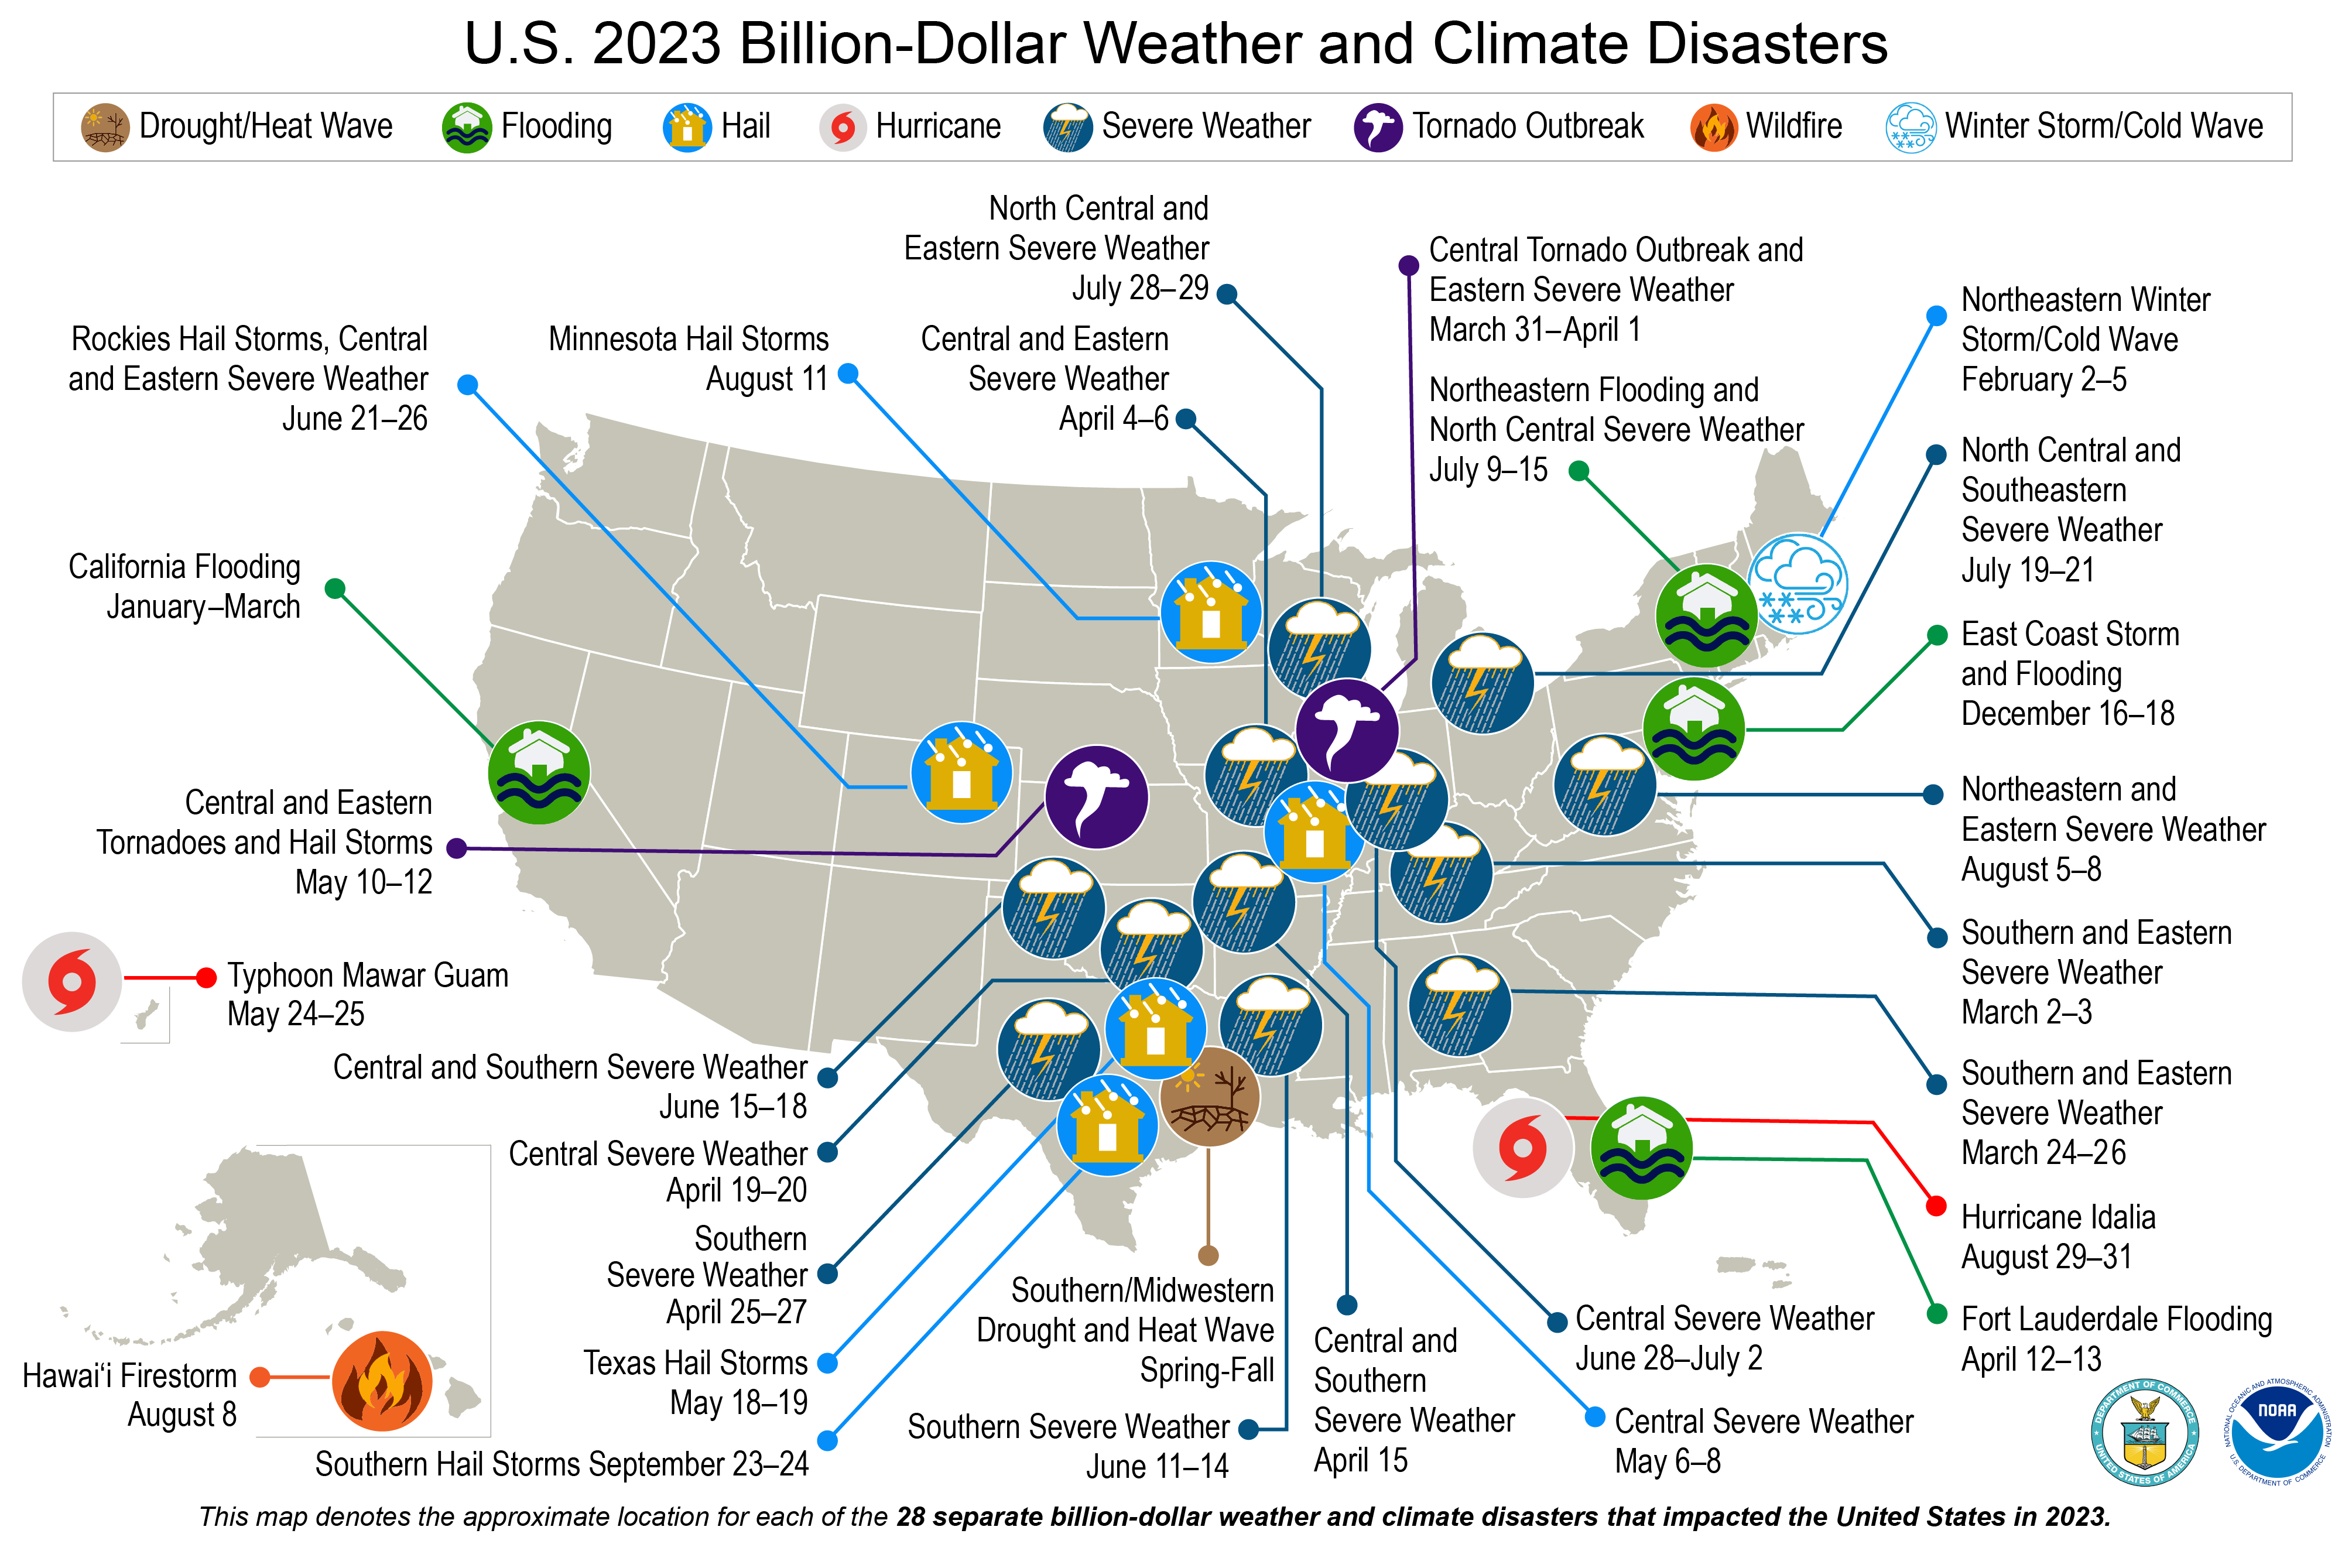 2023: A historic year of U.S. billion-dollar weather and climate disasters